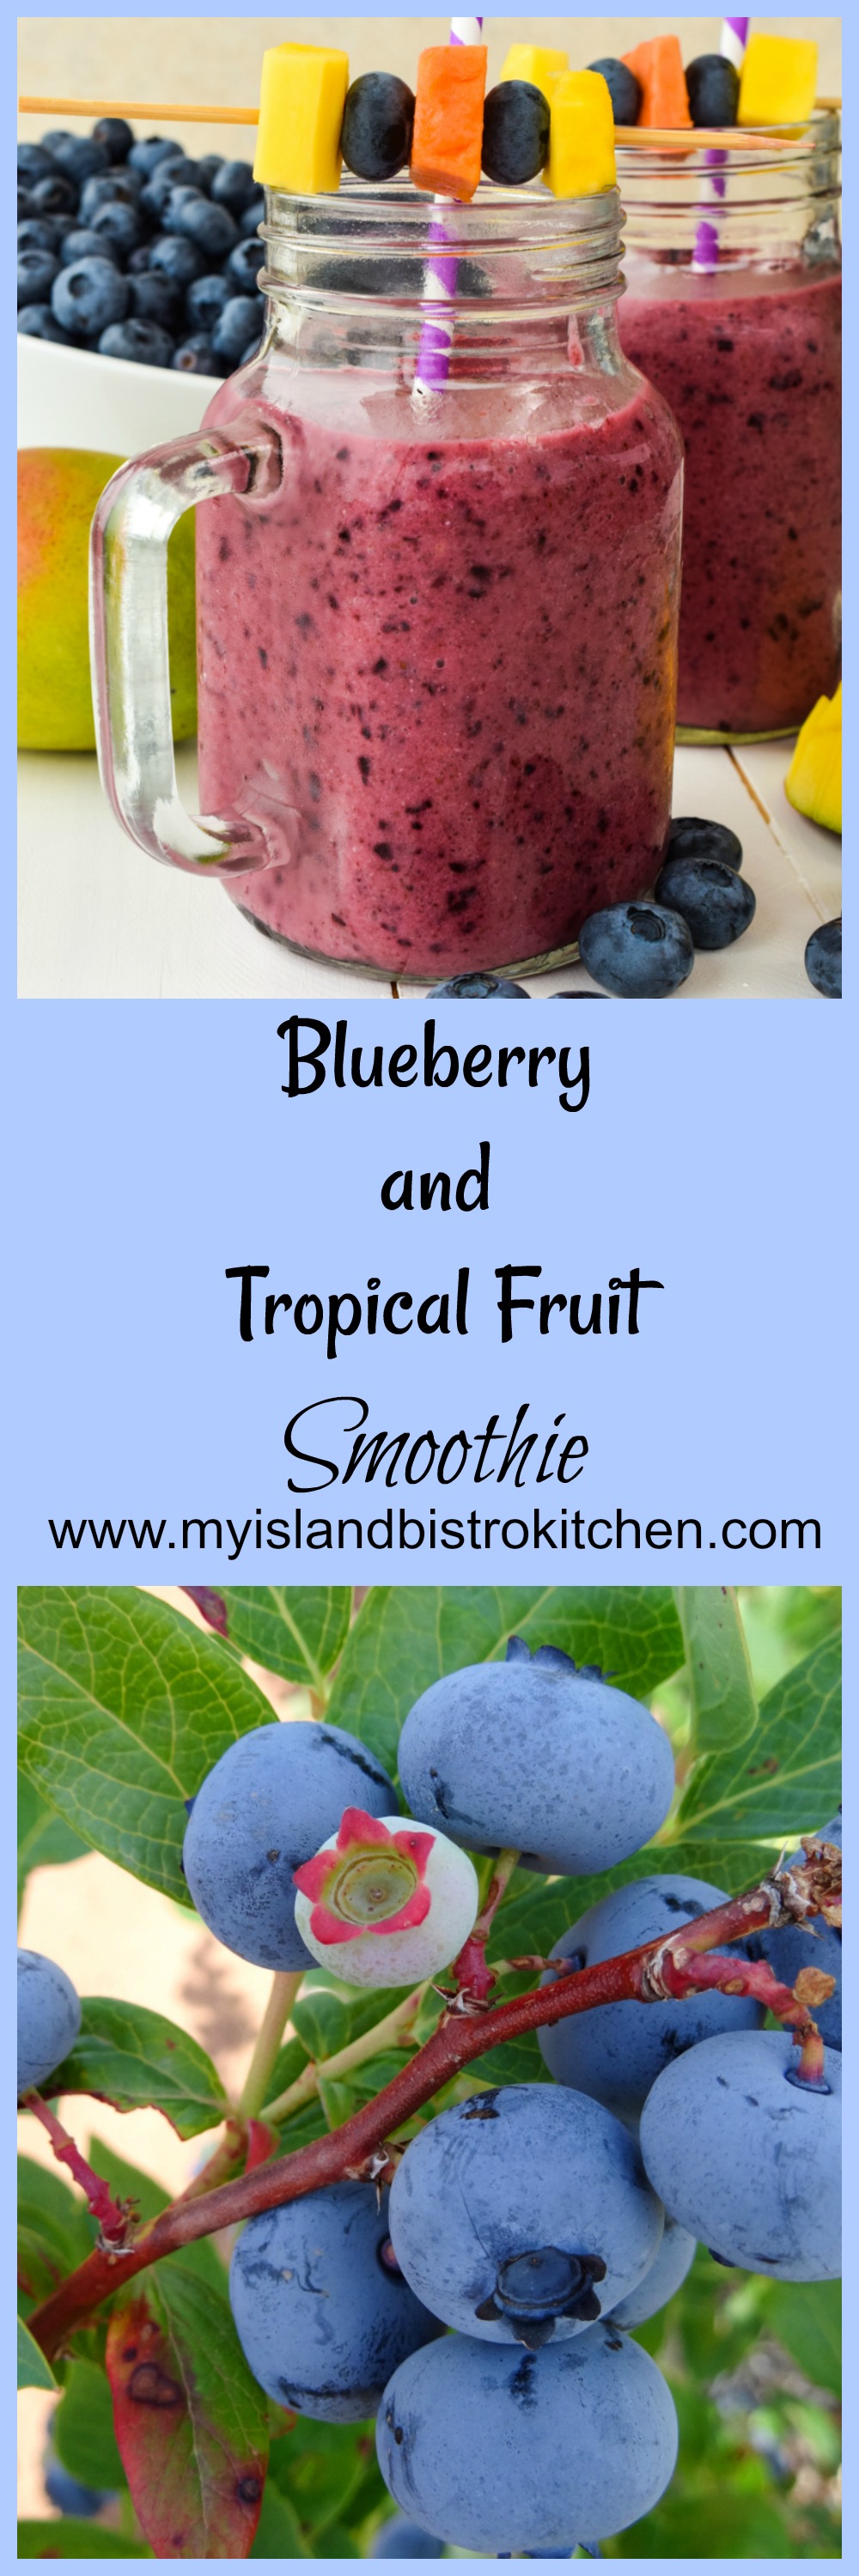 A delicious smoothie made with a blend of blueberries, tropical fruits, lavender yogurt, and mango-citrus fruit juice